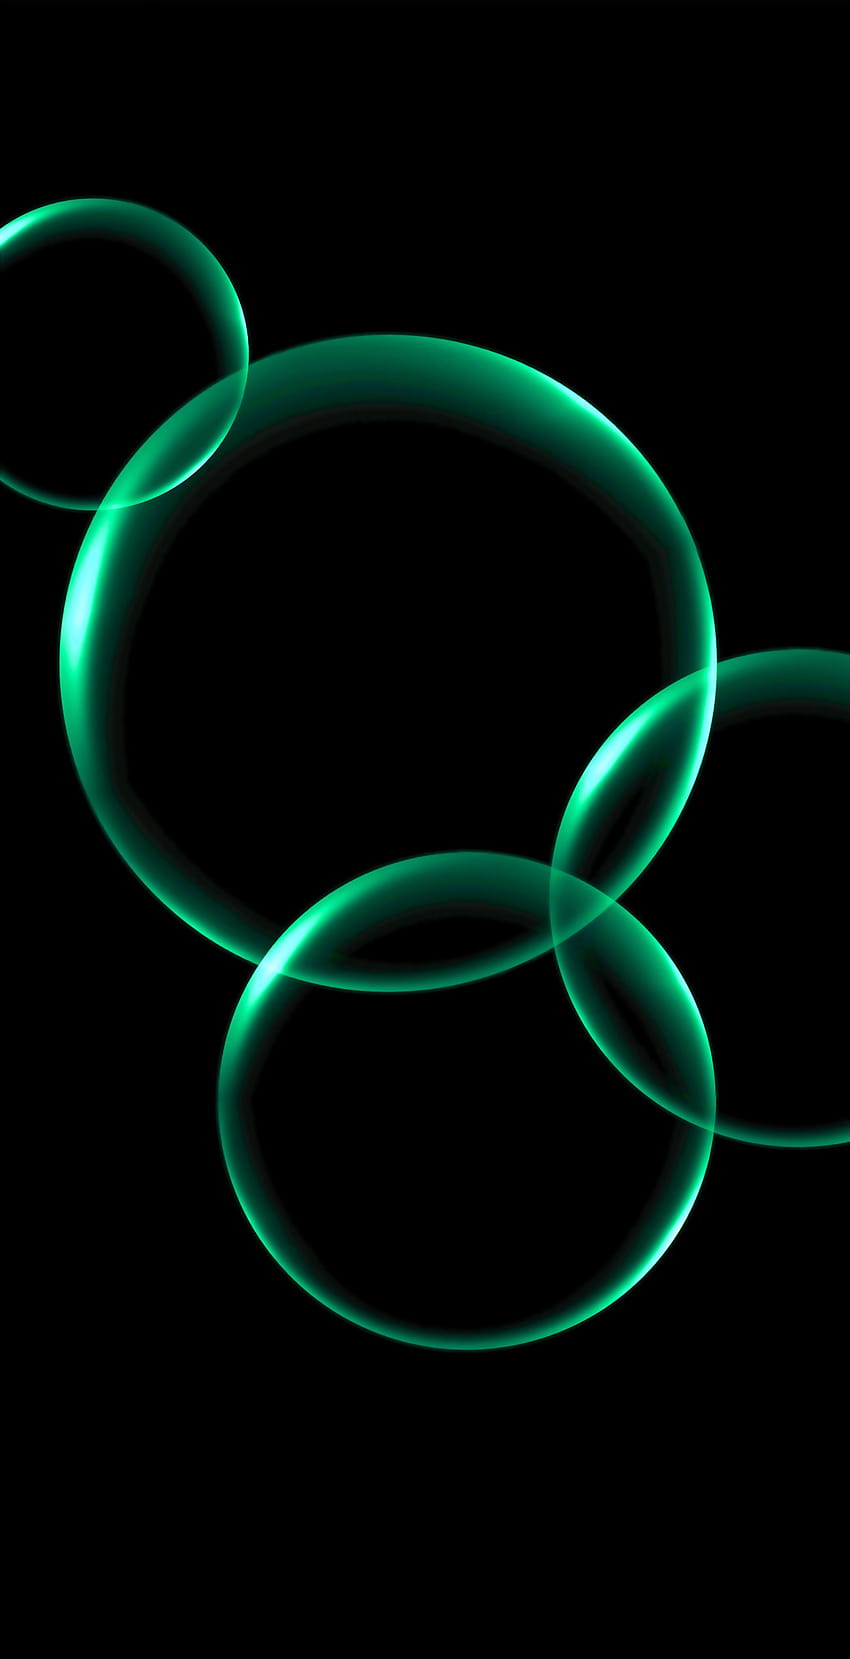 Black backgrounds green bubbles idk how to make it oled optimized :, dark green oled HD phone wallpaper